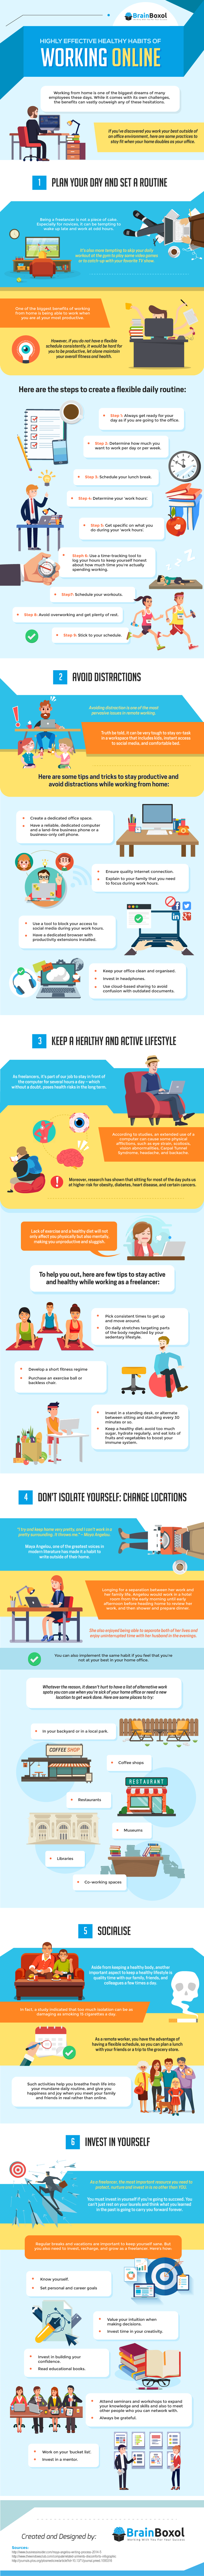 6 Highly Effective Healthy Habits of Working Online (Infographic)